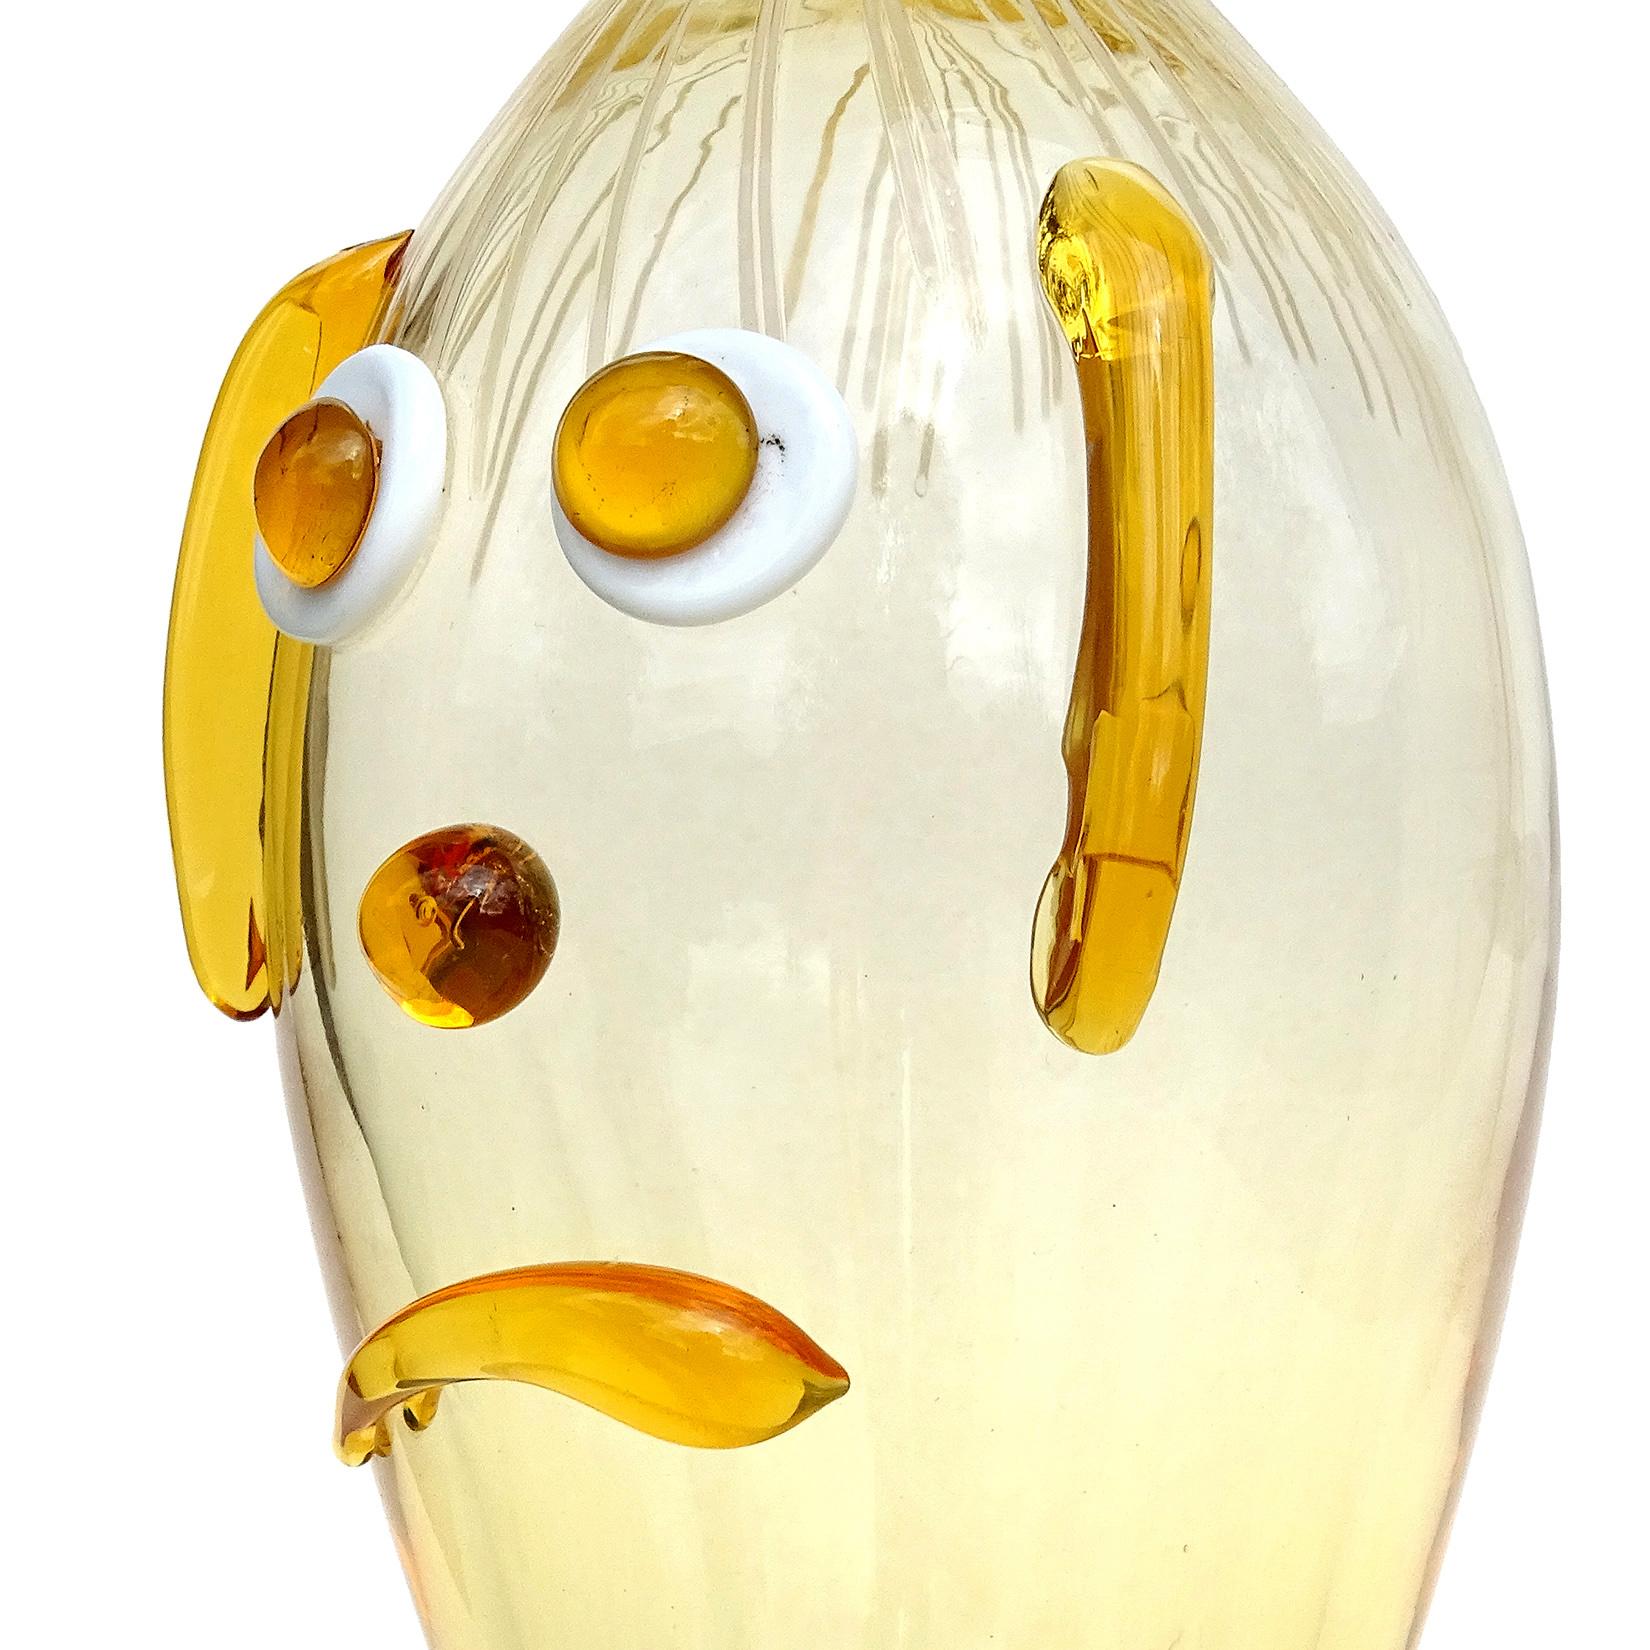 Cute and rare, vintage Murano hand blown yellow orange Italian art glass clown face decanter. Documented to the Fratelli Toso Company. The piece has applied ears, big eyes, a frown and threads of light pink glass for the hair. Would make a great